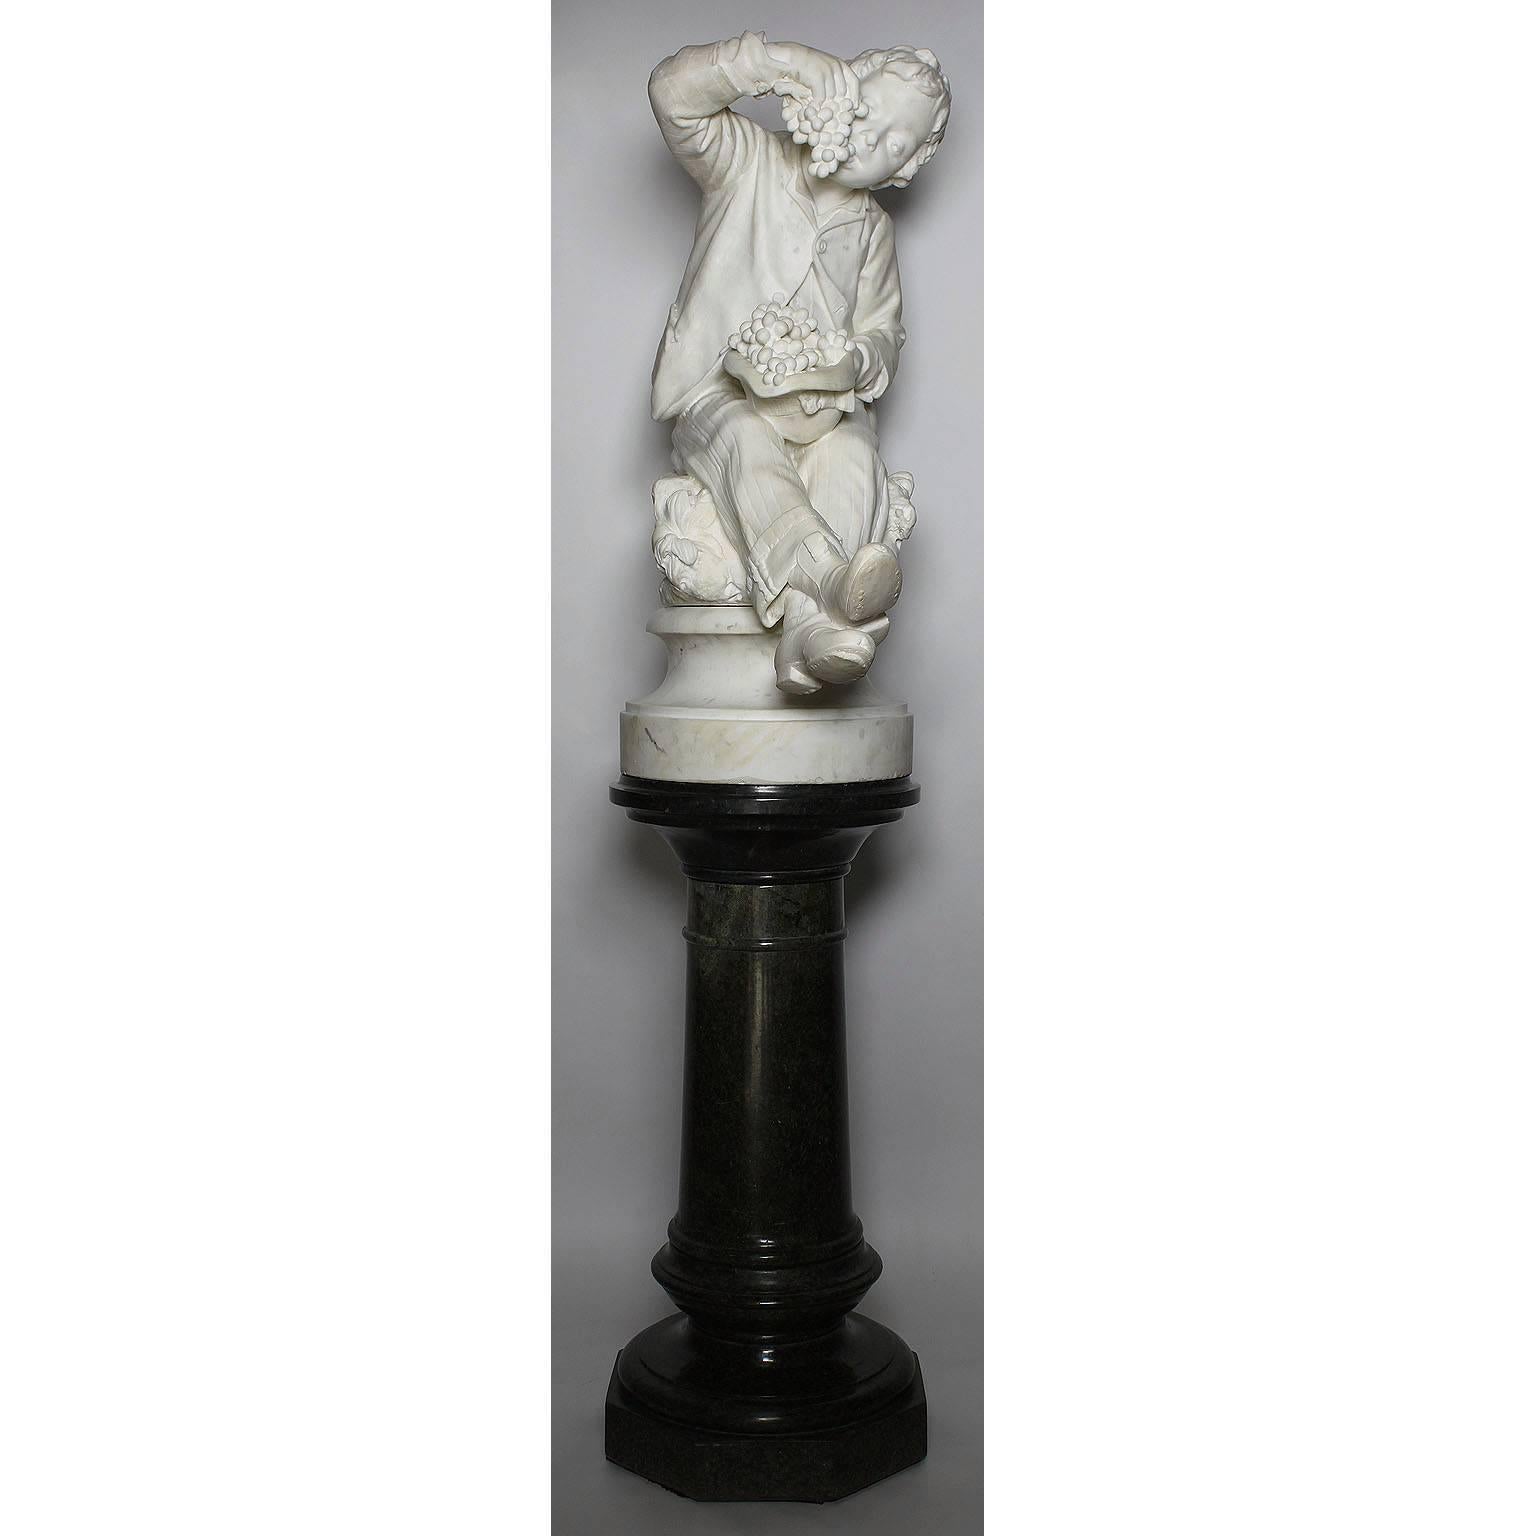 A very fine Italian 19th century carved carrara marble sculpture Group Titled 